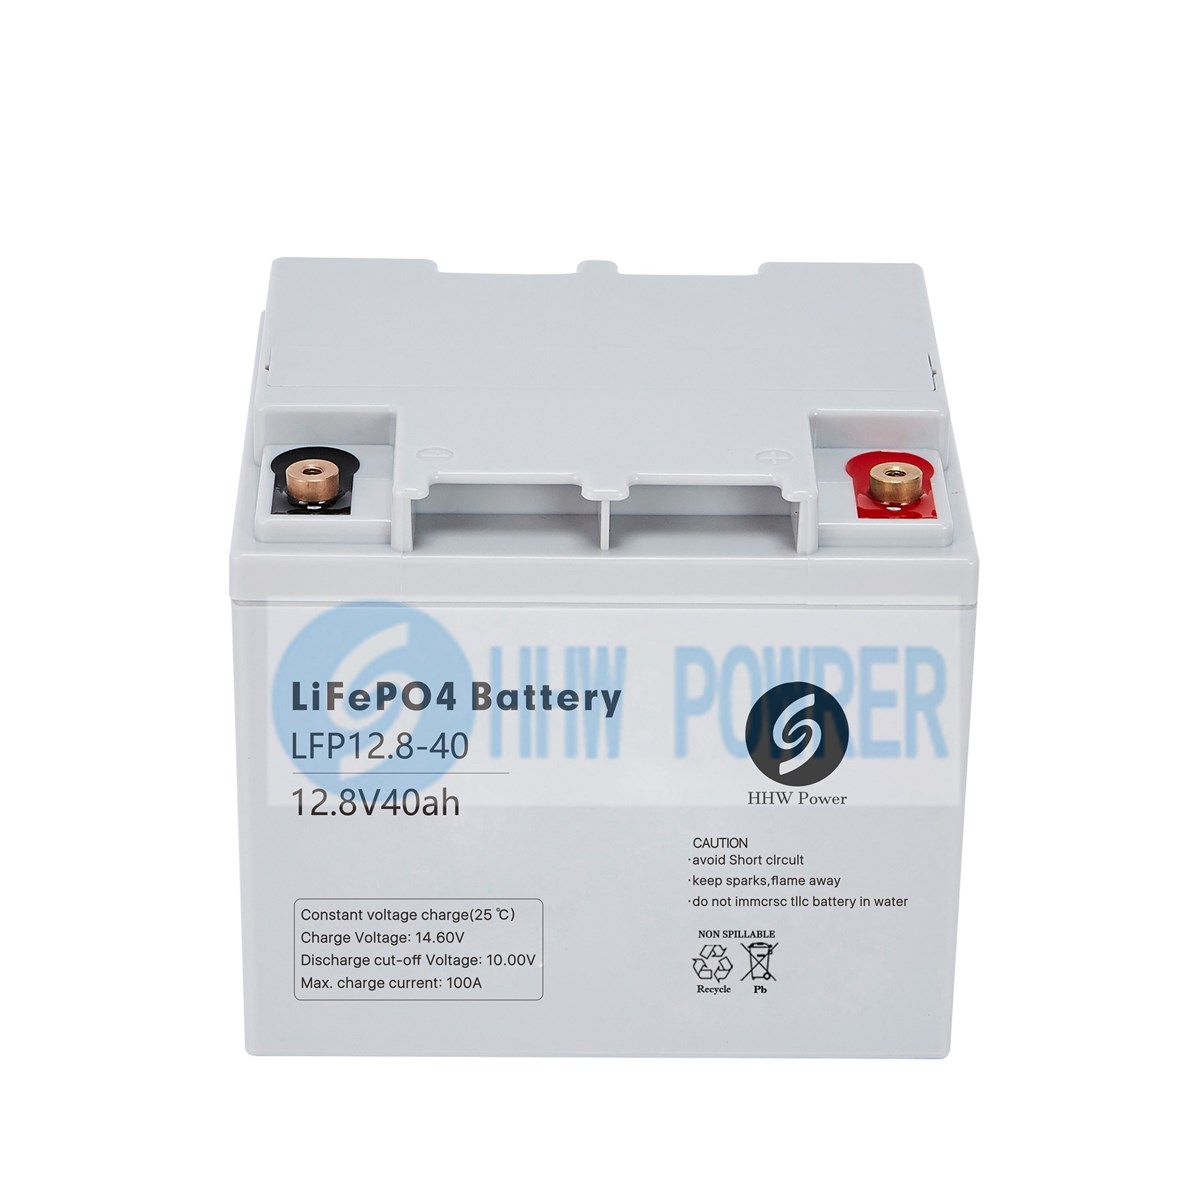 128v40ah LiFePO4 deep cycle and high performance designed for for ups and solar power system applications